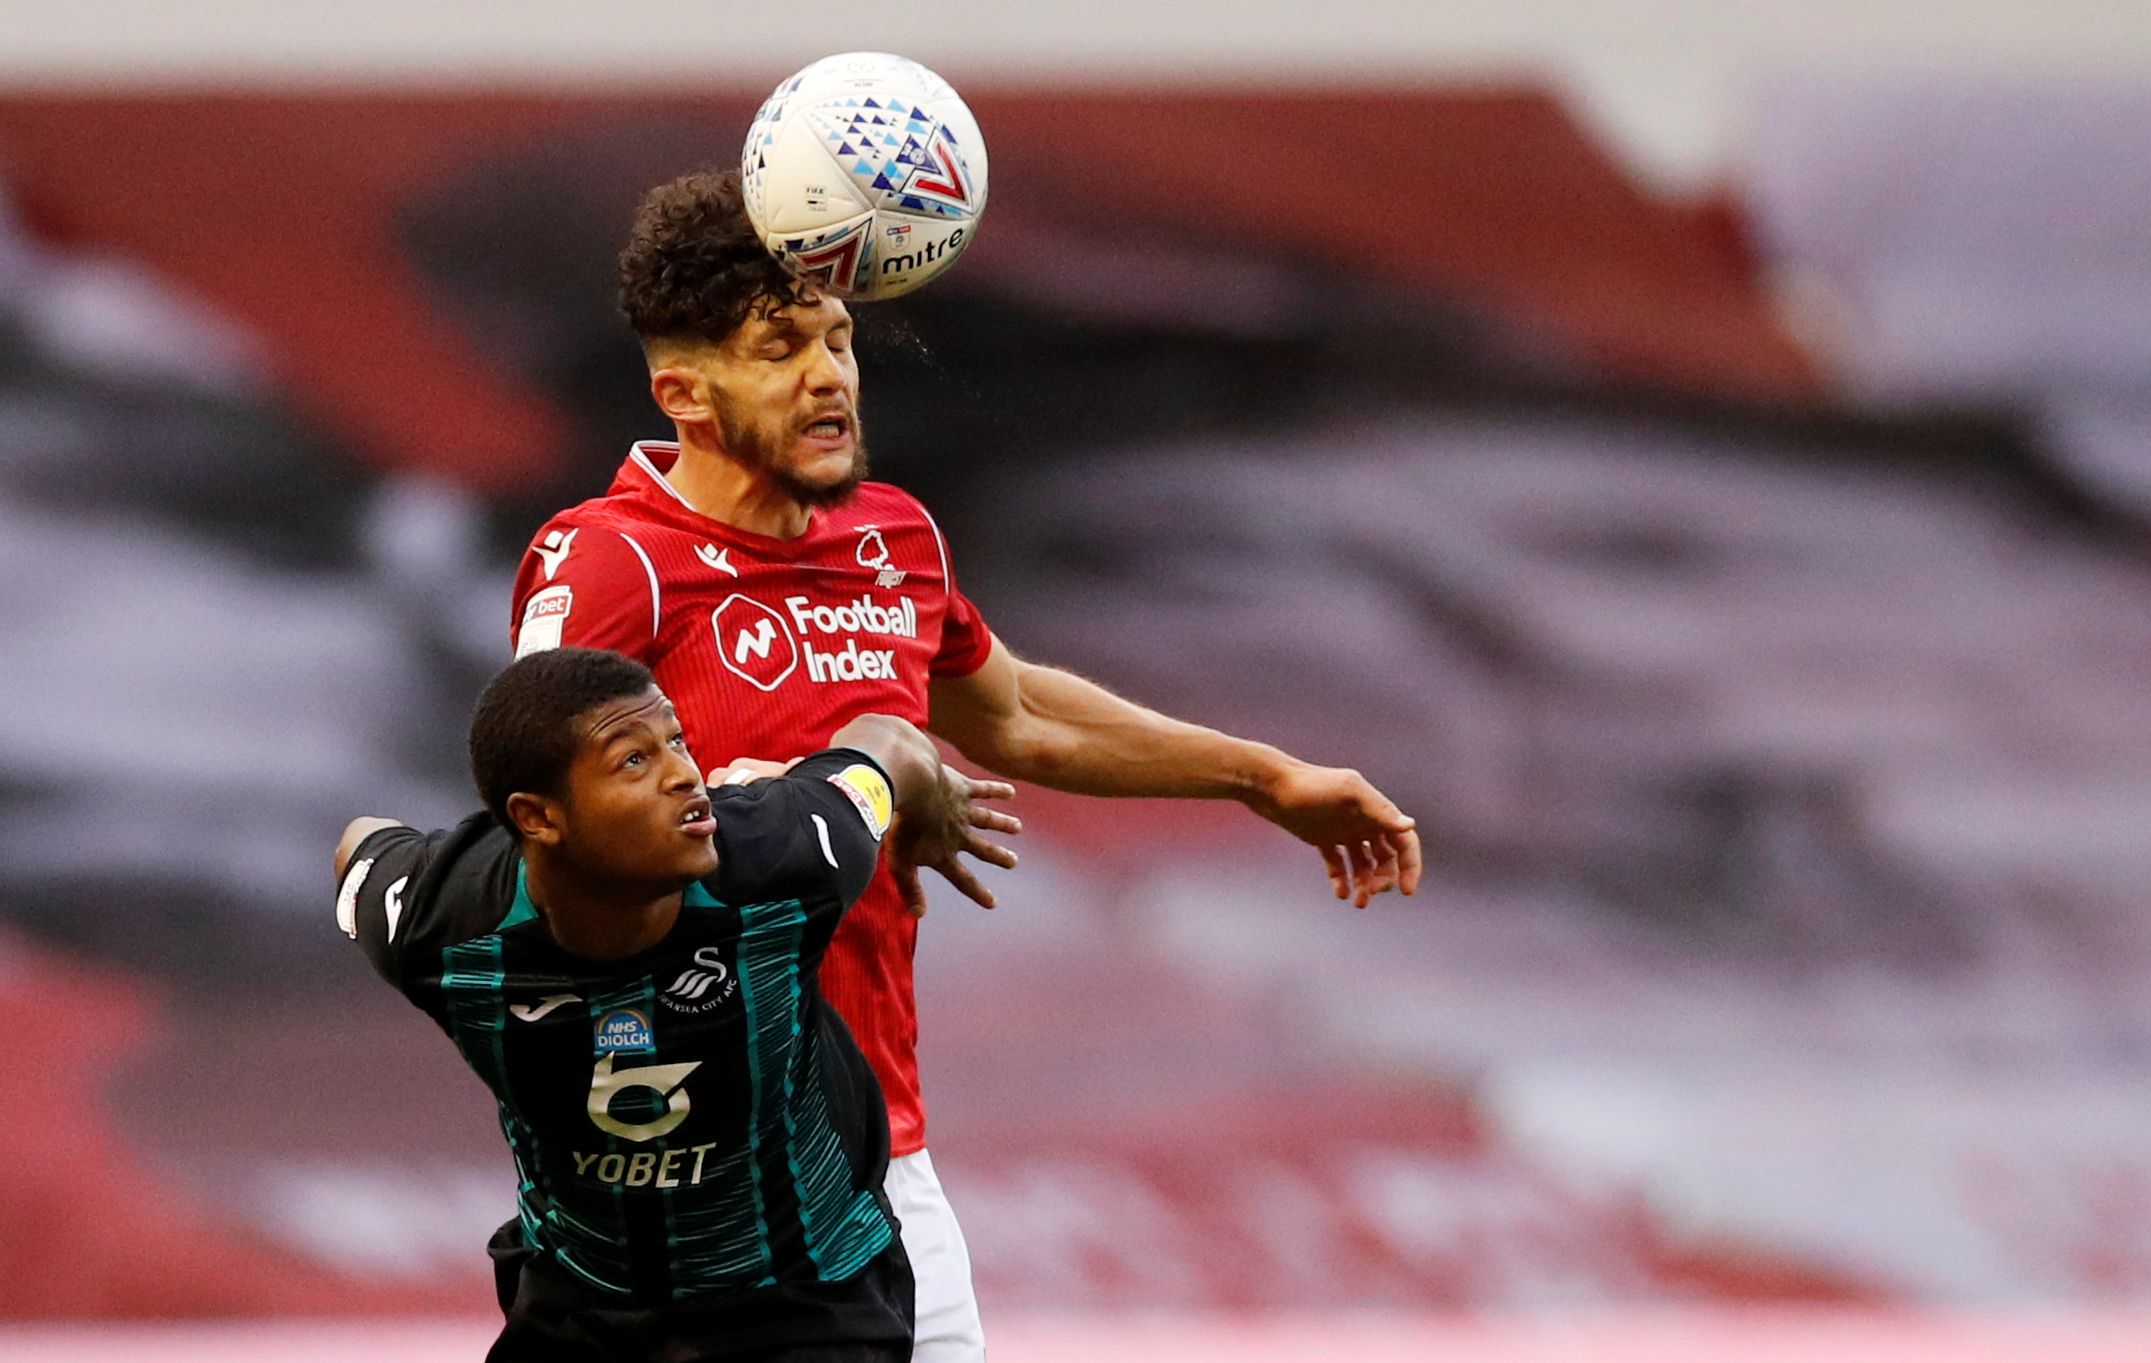 Soccer Football - Championship - Nottingham Forest v Swansea City - The City Ground, Nottingham, Britain - July 15, 2020   Nottingham Forest's Tobias Figueiredo in action with Swansea City's Rhian Brewster, as play resumes behind closed doors following the outbreak of the coronavirus disease (COVID-19)   Action Images/Andrew Boyers    EDITORIAL USE ONLY. No use with unauthorized audio, video, data, fixture lists, club/league logos or 